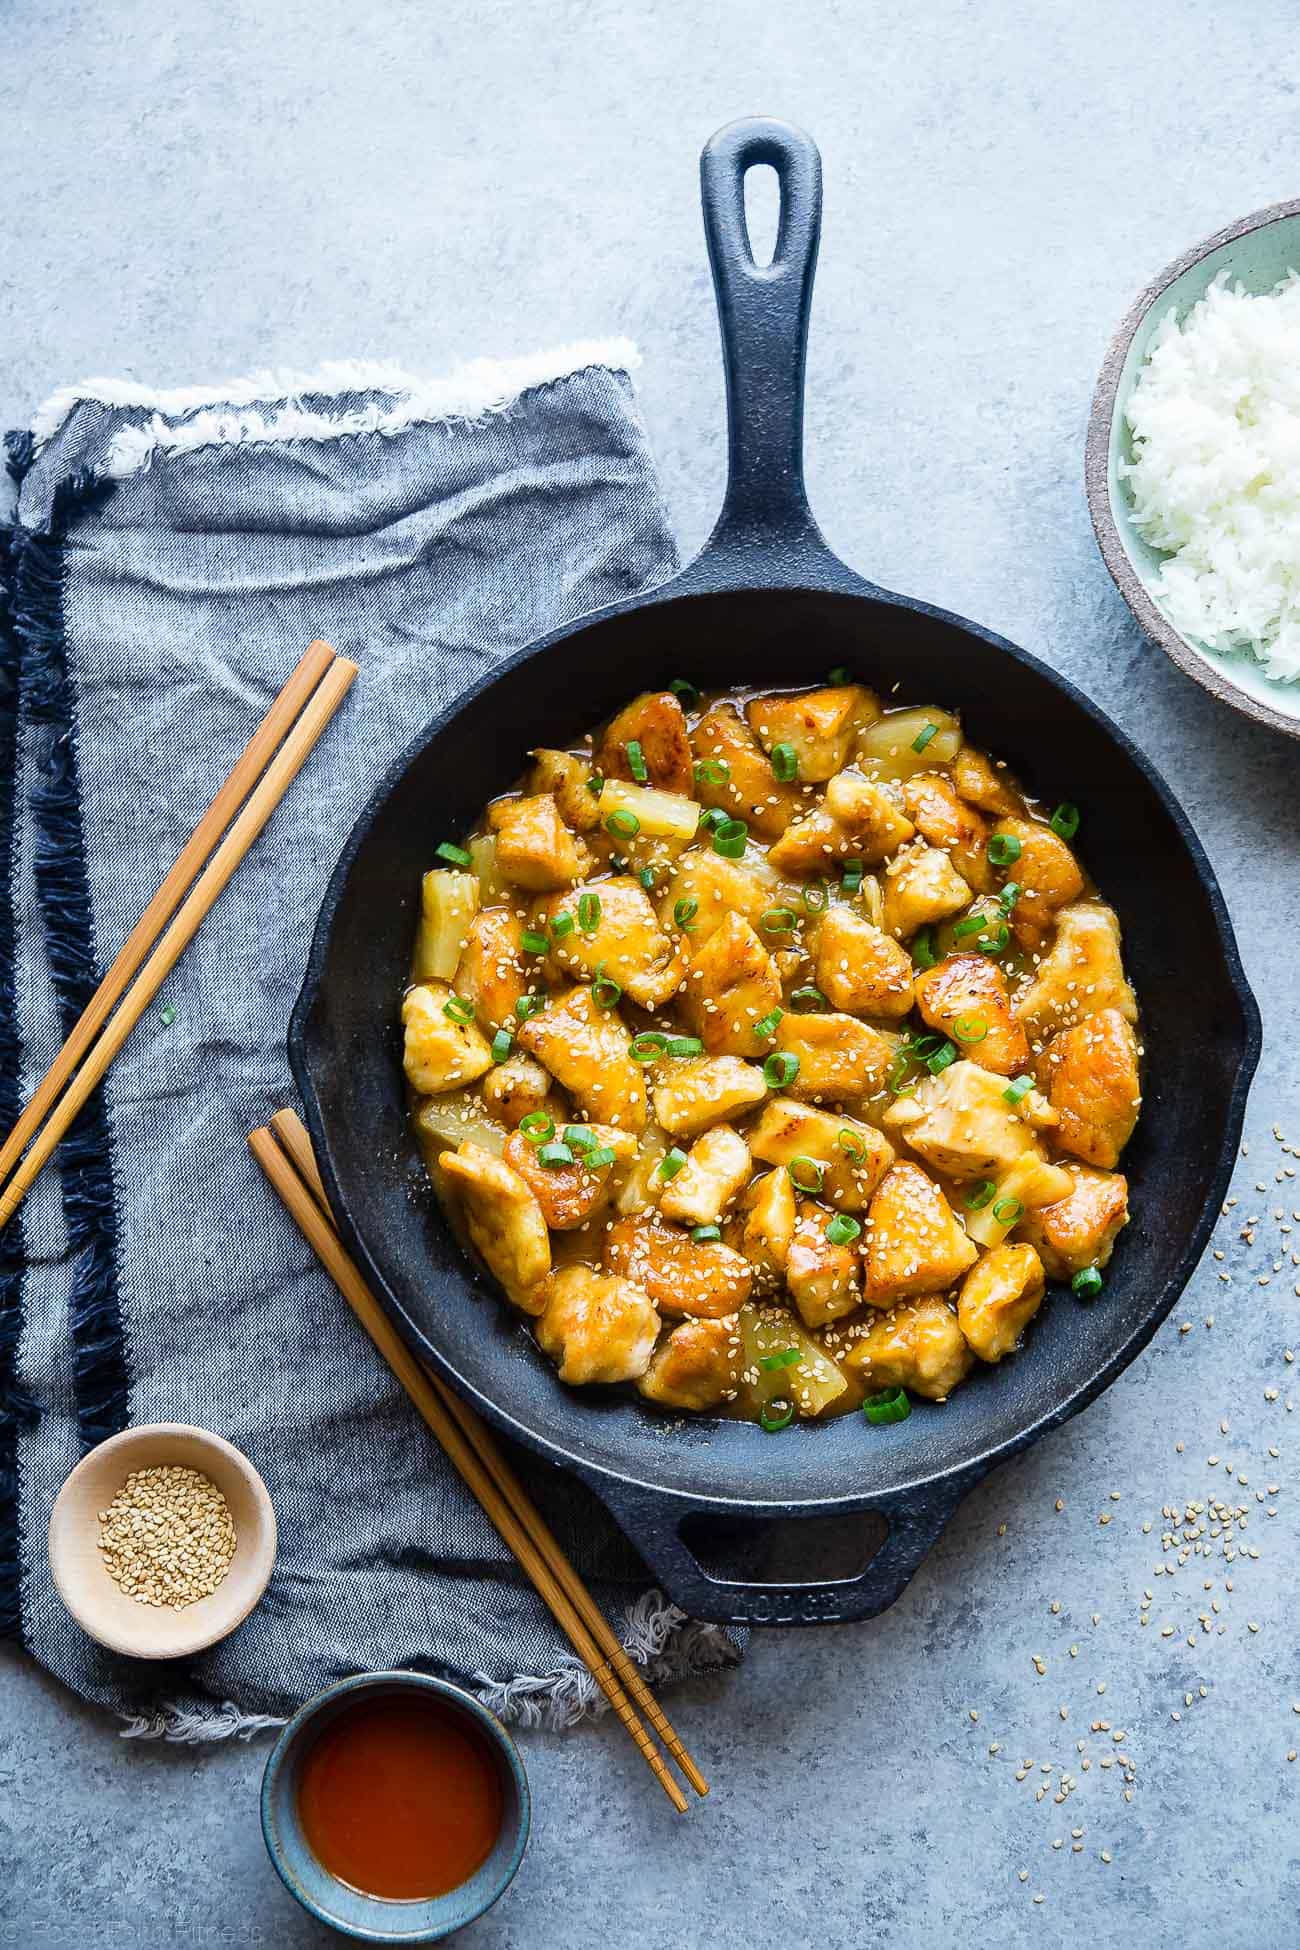  Whole30 Firecracker Pineapple Chicken - This healthy, sweet and spicy chicken is way better than takeout! A gluten free, paleo and whole30 compliant dinner that is always a crowd pleaser! | #Foodfaithfitness | #Paleo #Whole30 #Glutenfree #Healthy